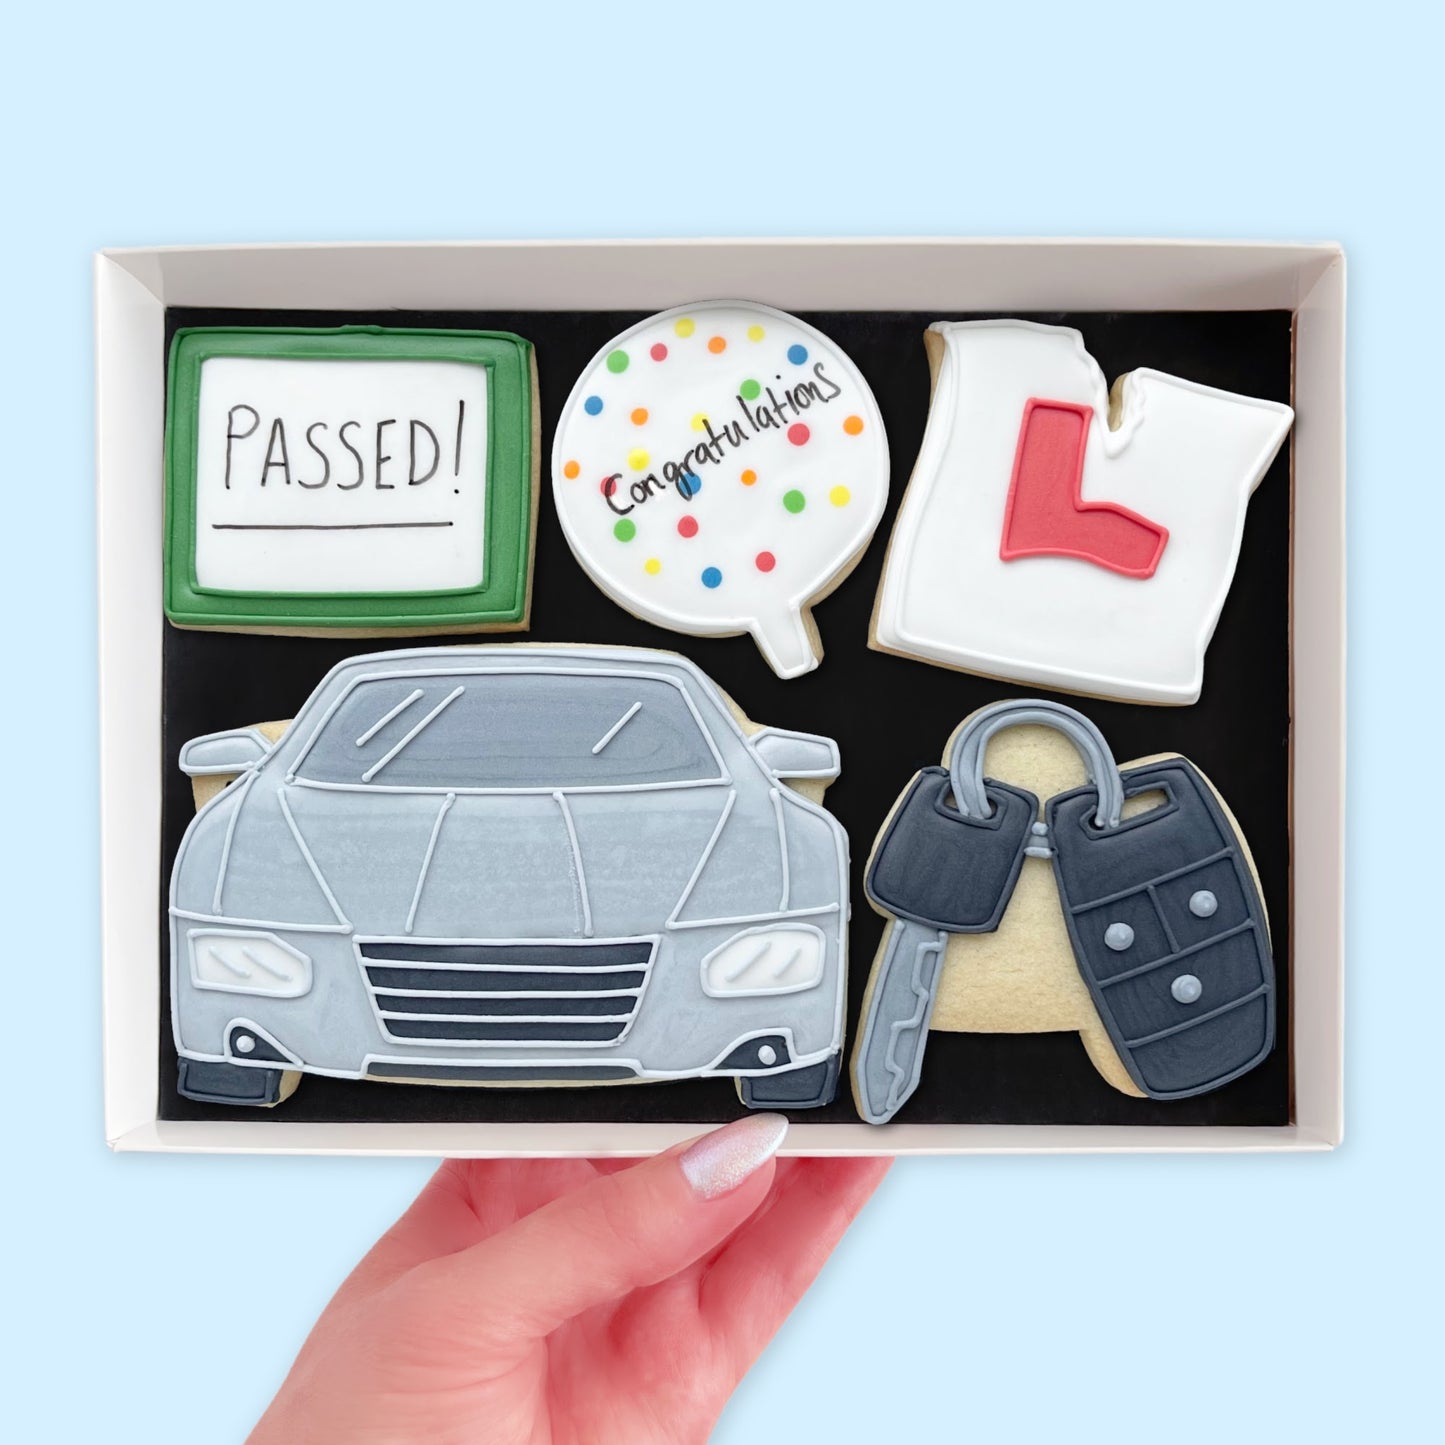 Passed! Your Driving Test Iced Biscuits